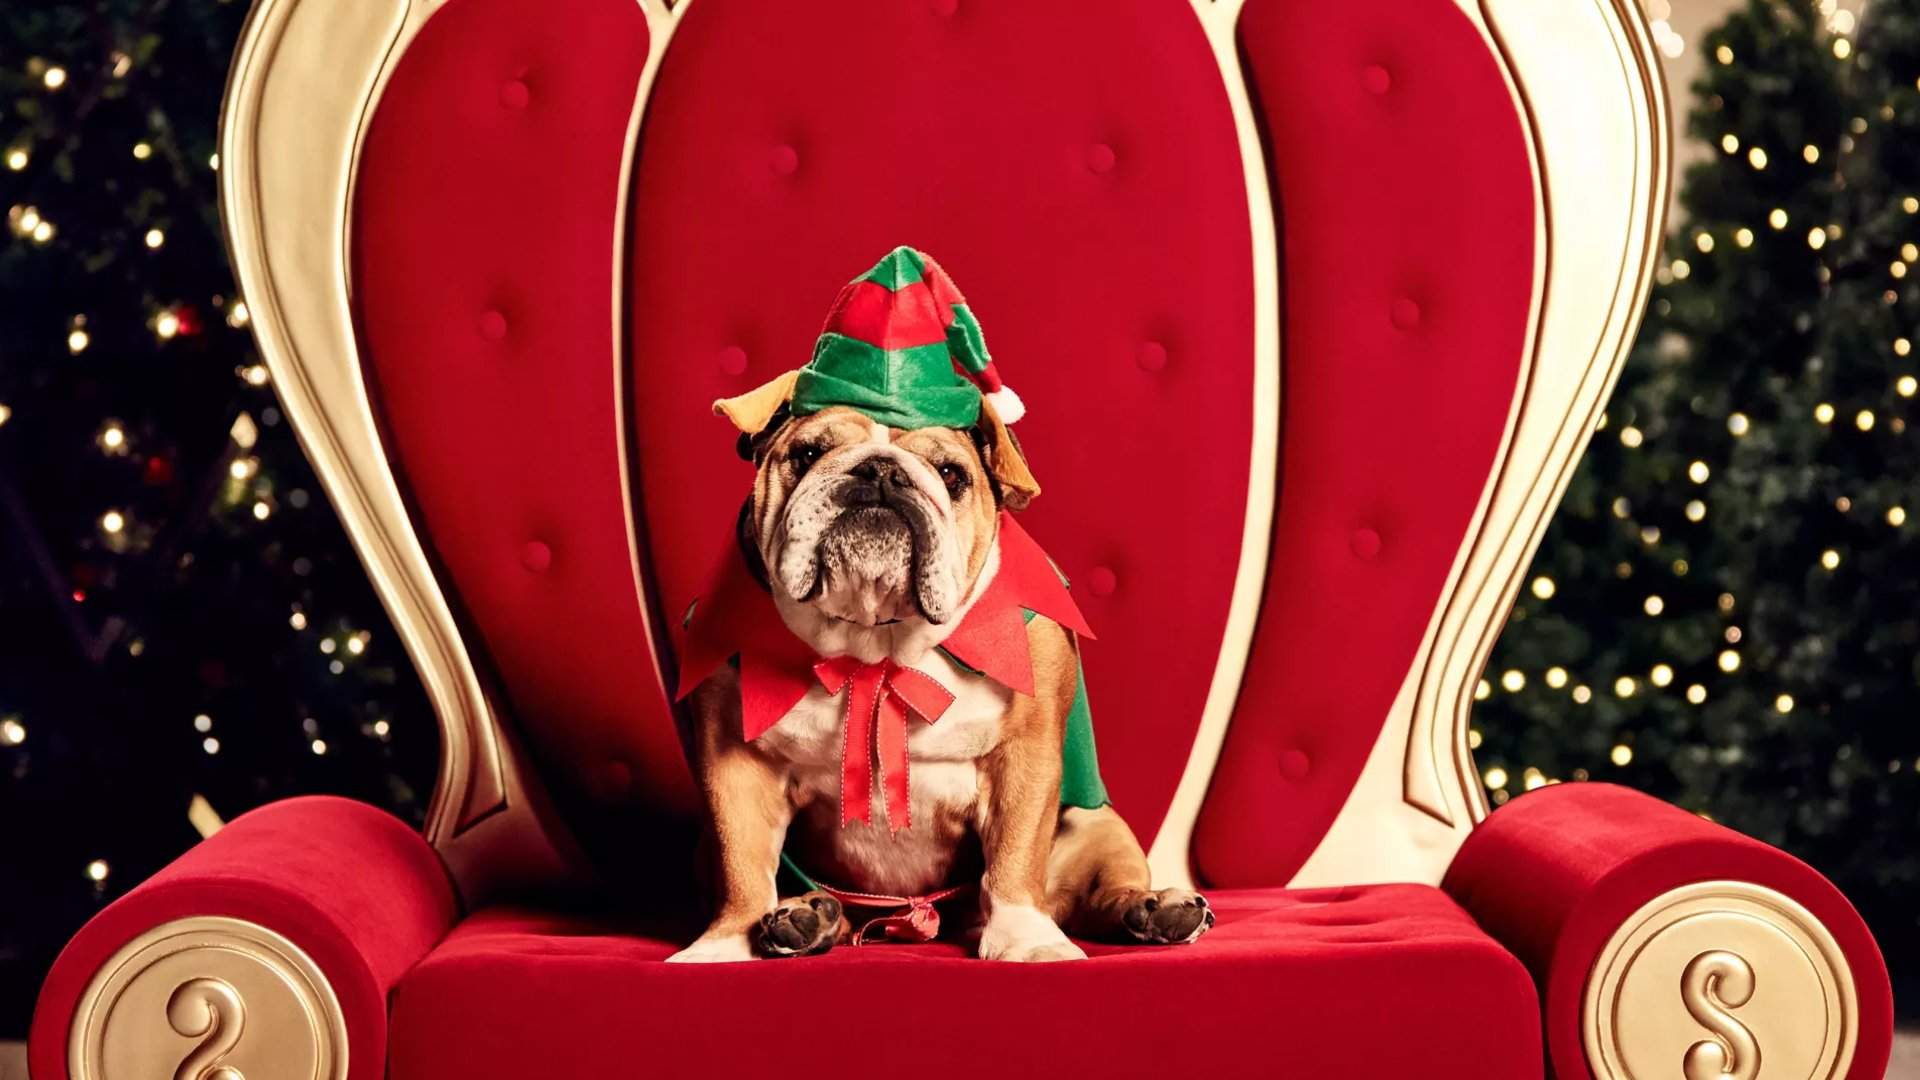 Picture Time: Westfield Is Bringing Back Its Adorable Pet Photo Shoots with Santa This Christmas